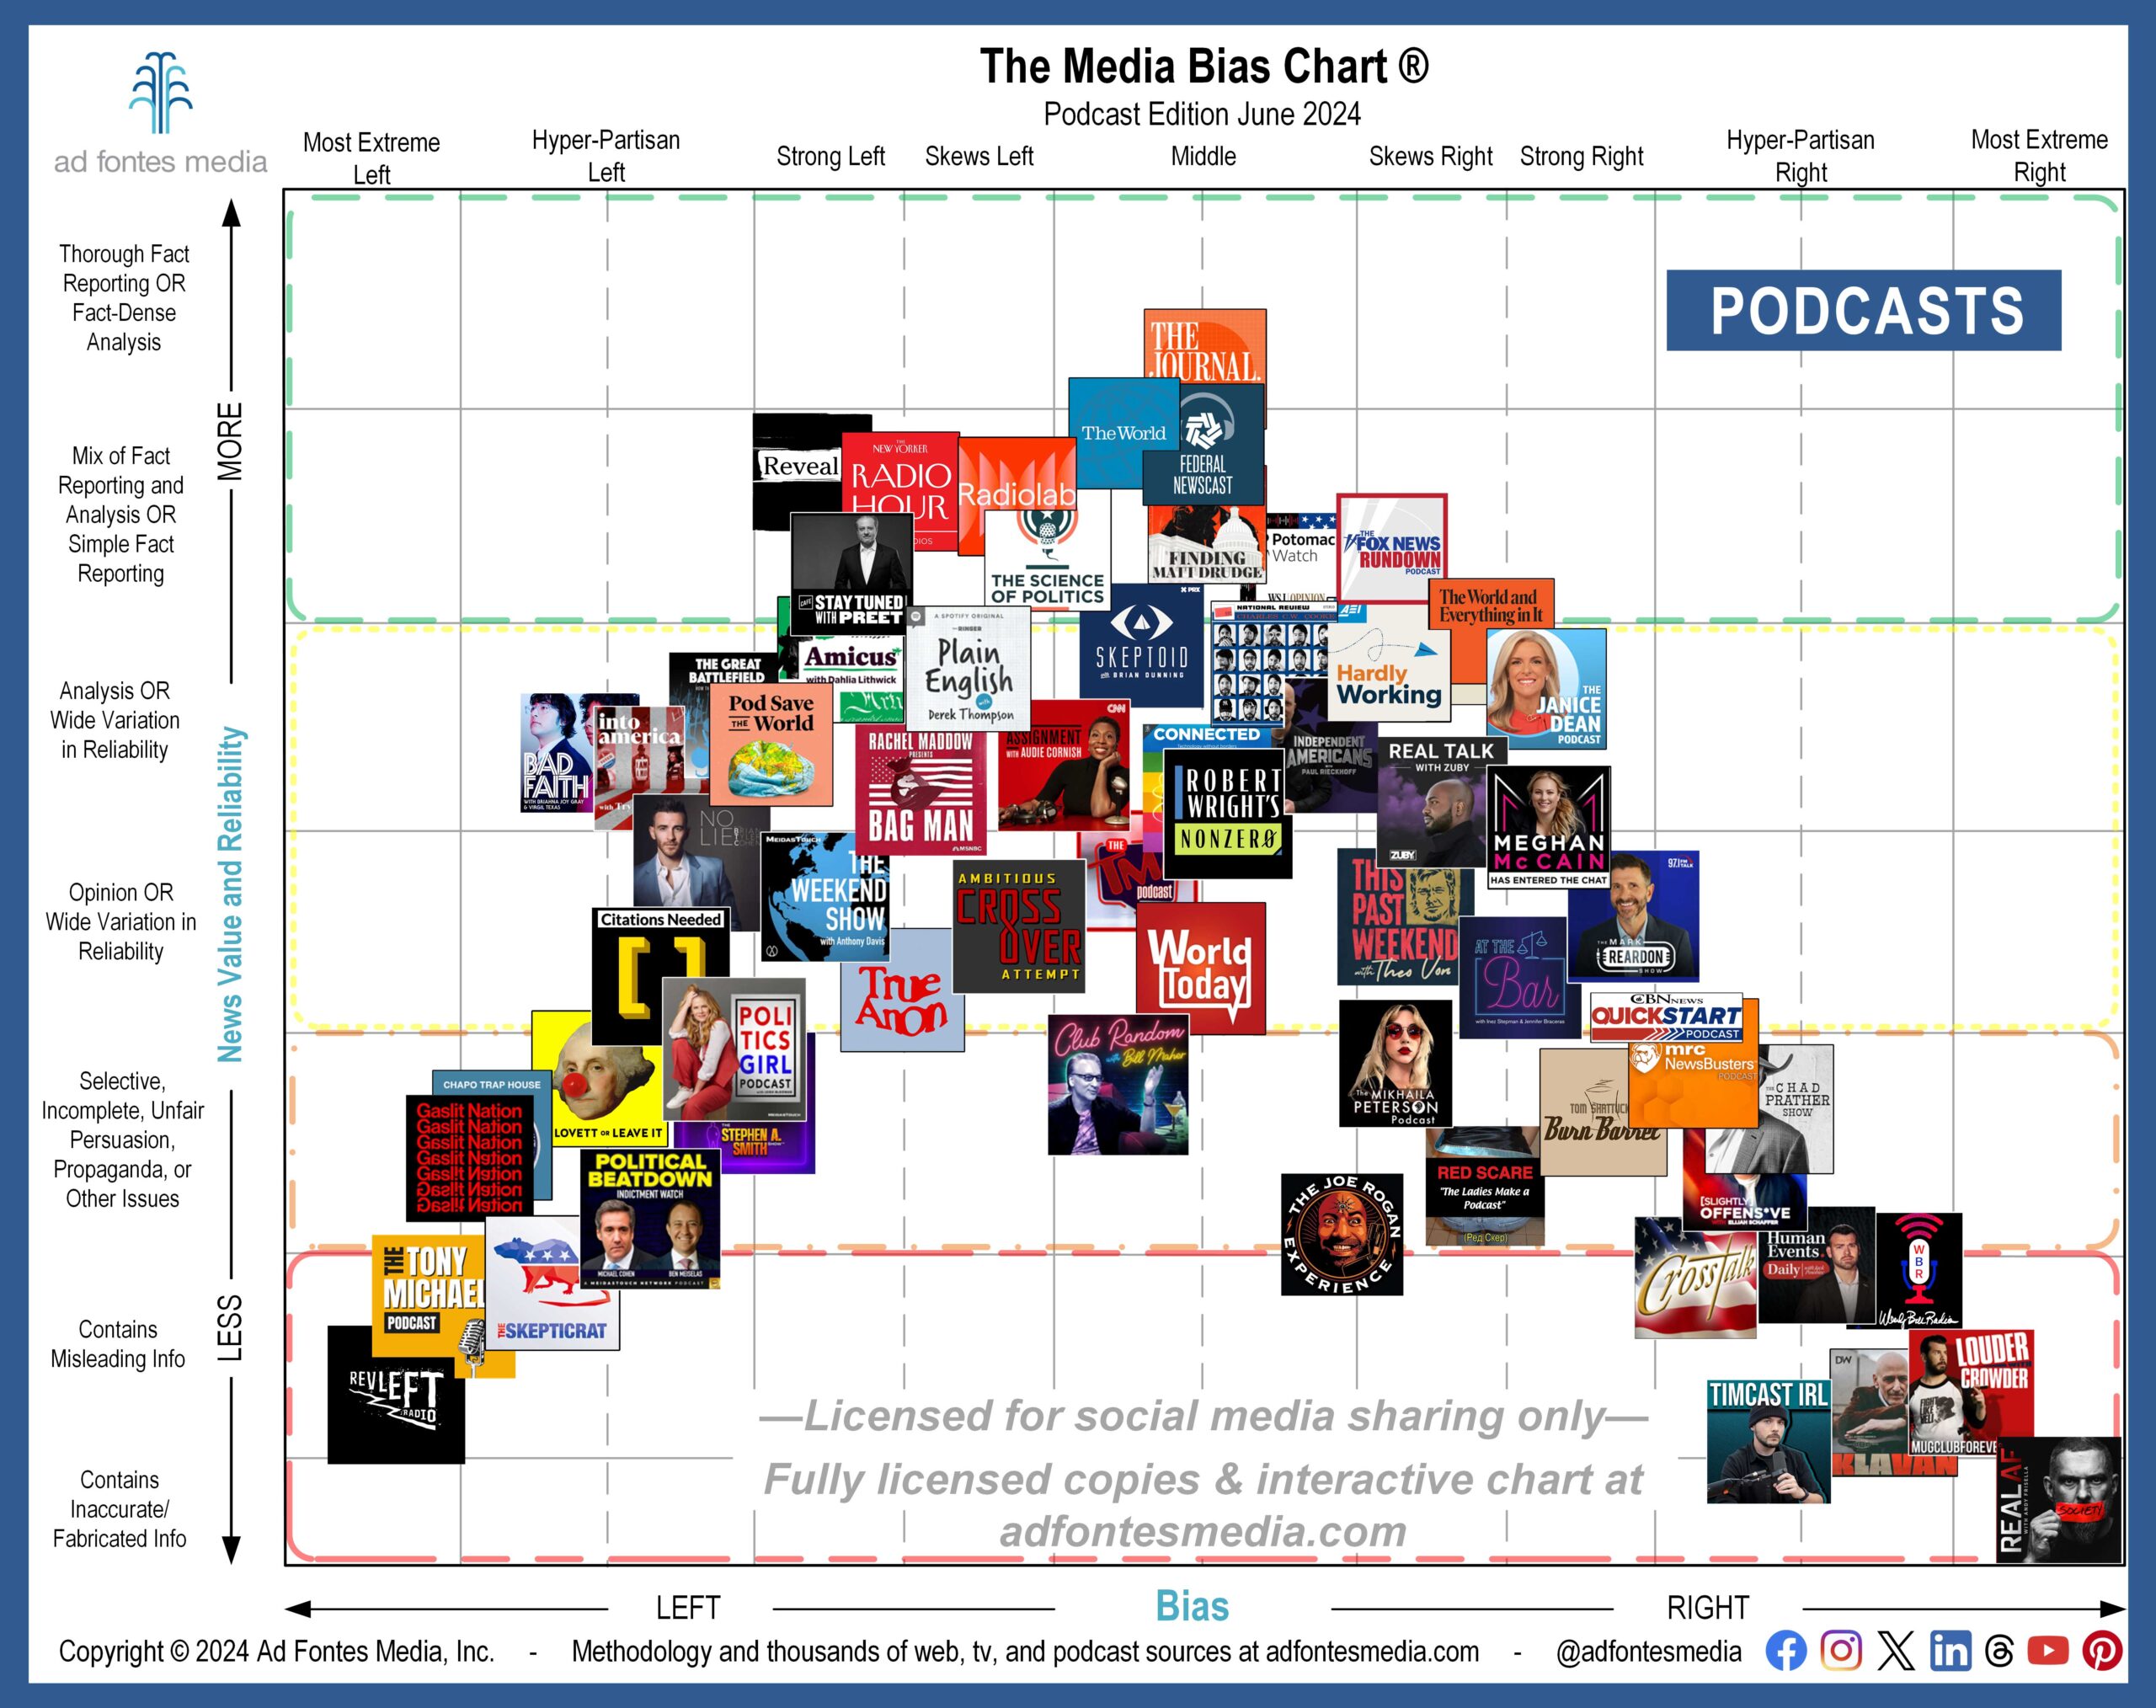 Ad Fontes Media features 64 podcasts on the June Media Bias Chart, 8 of them for the first time